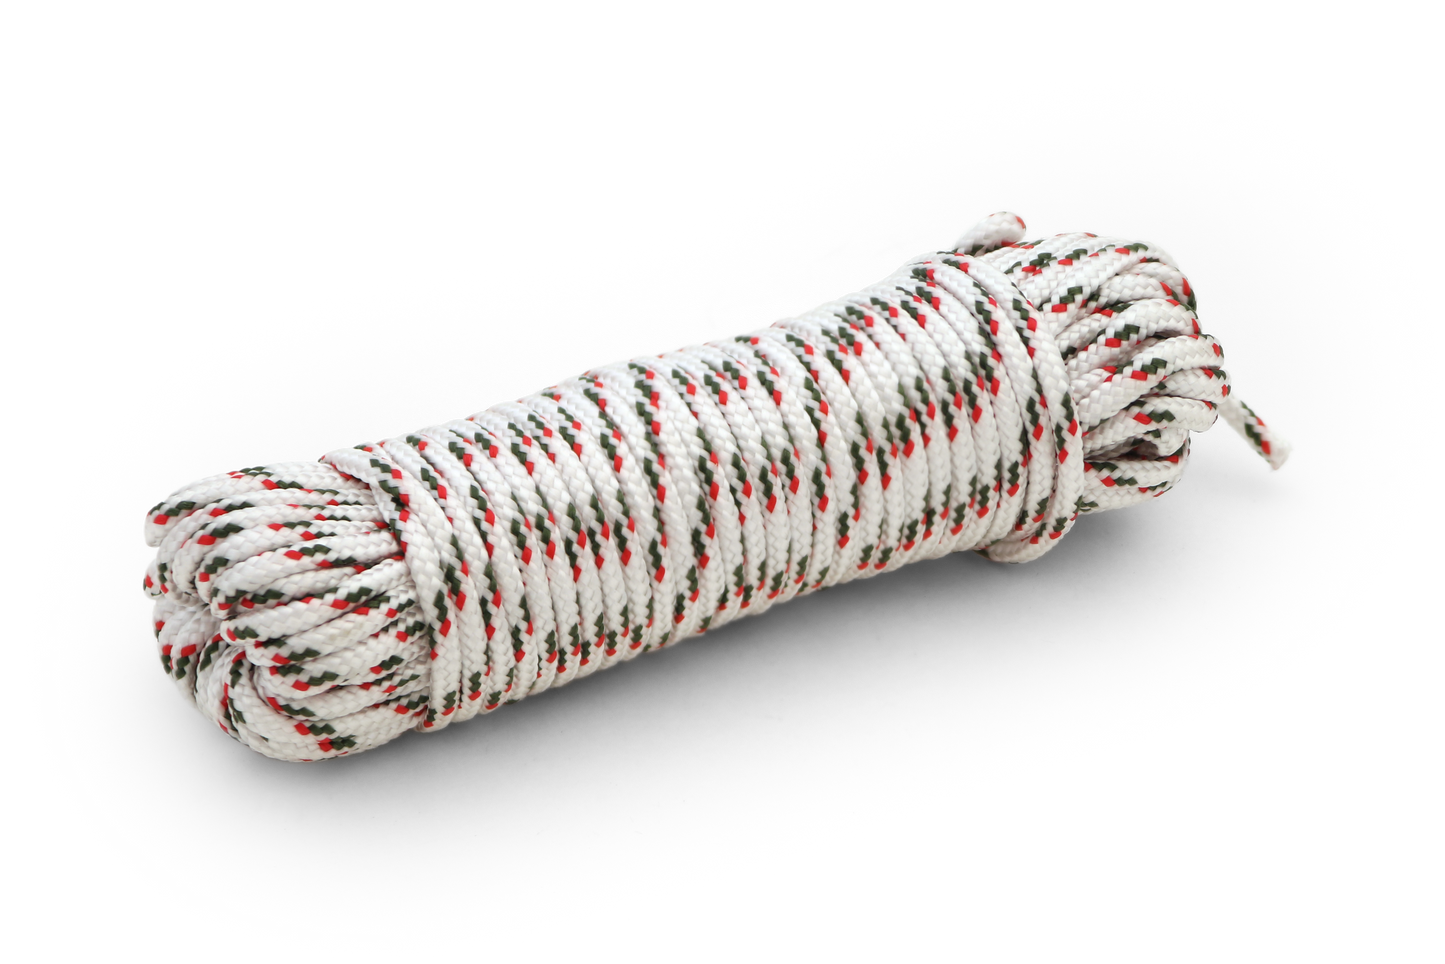 Utility Cord - 3 mm